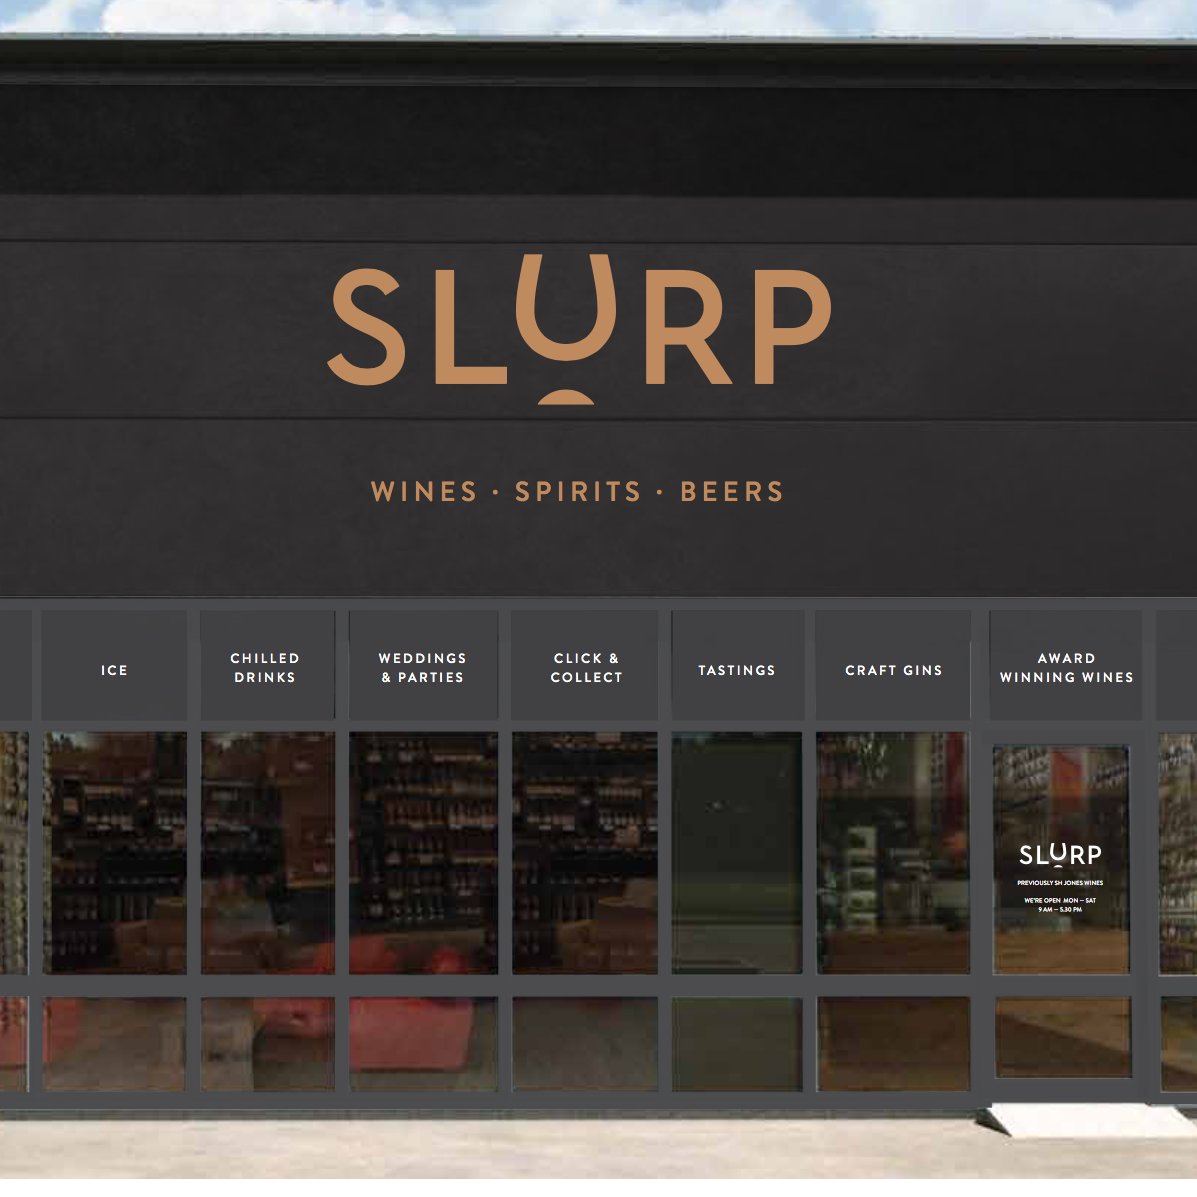 Official Account of the Banbury Slurp retail store. Selling a constantly evolving selection of wines, spirits and beers. Come find us on Tramway Road!